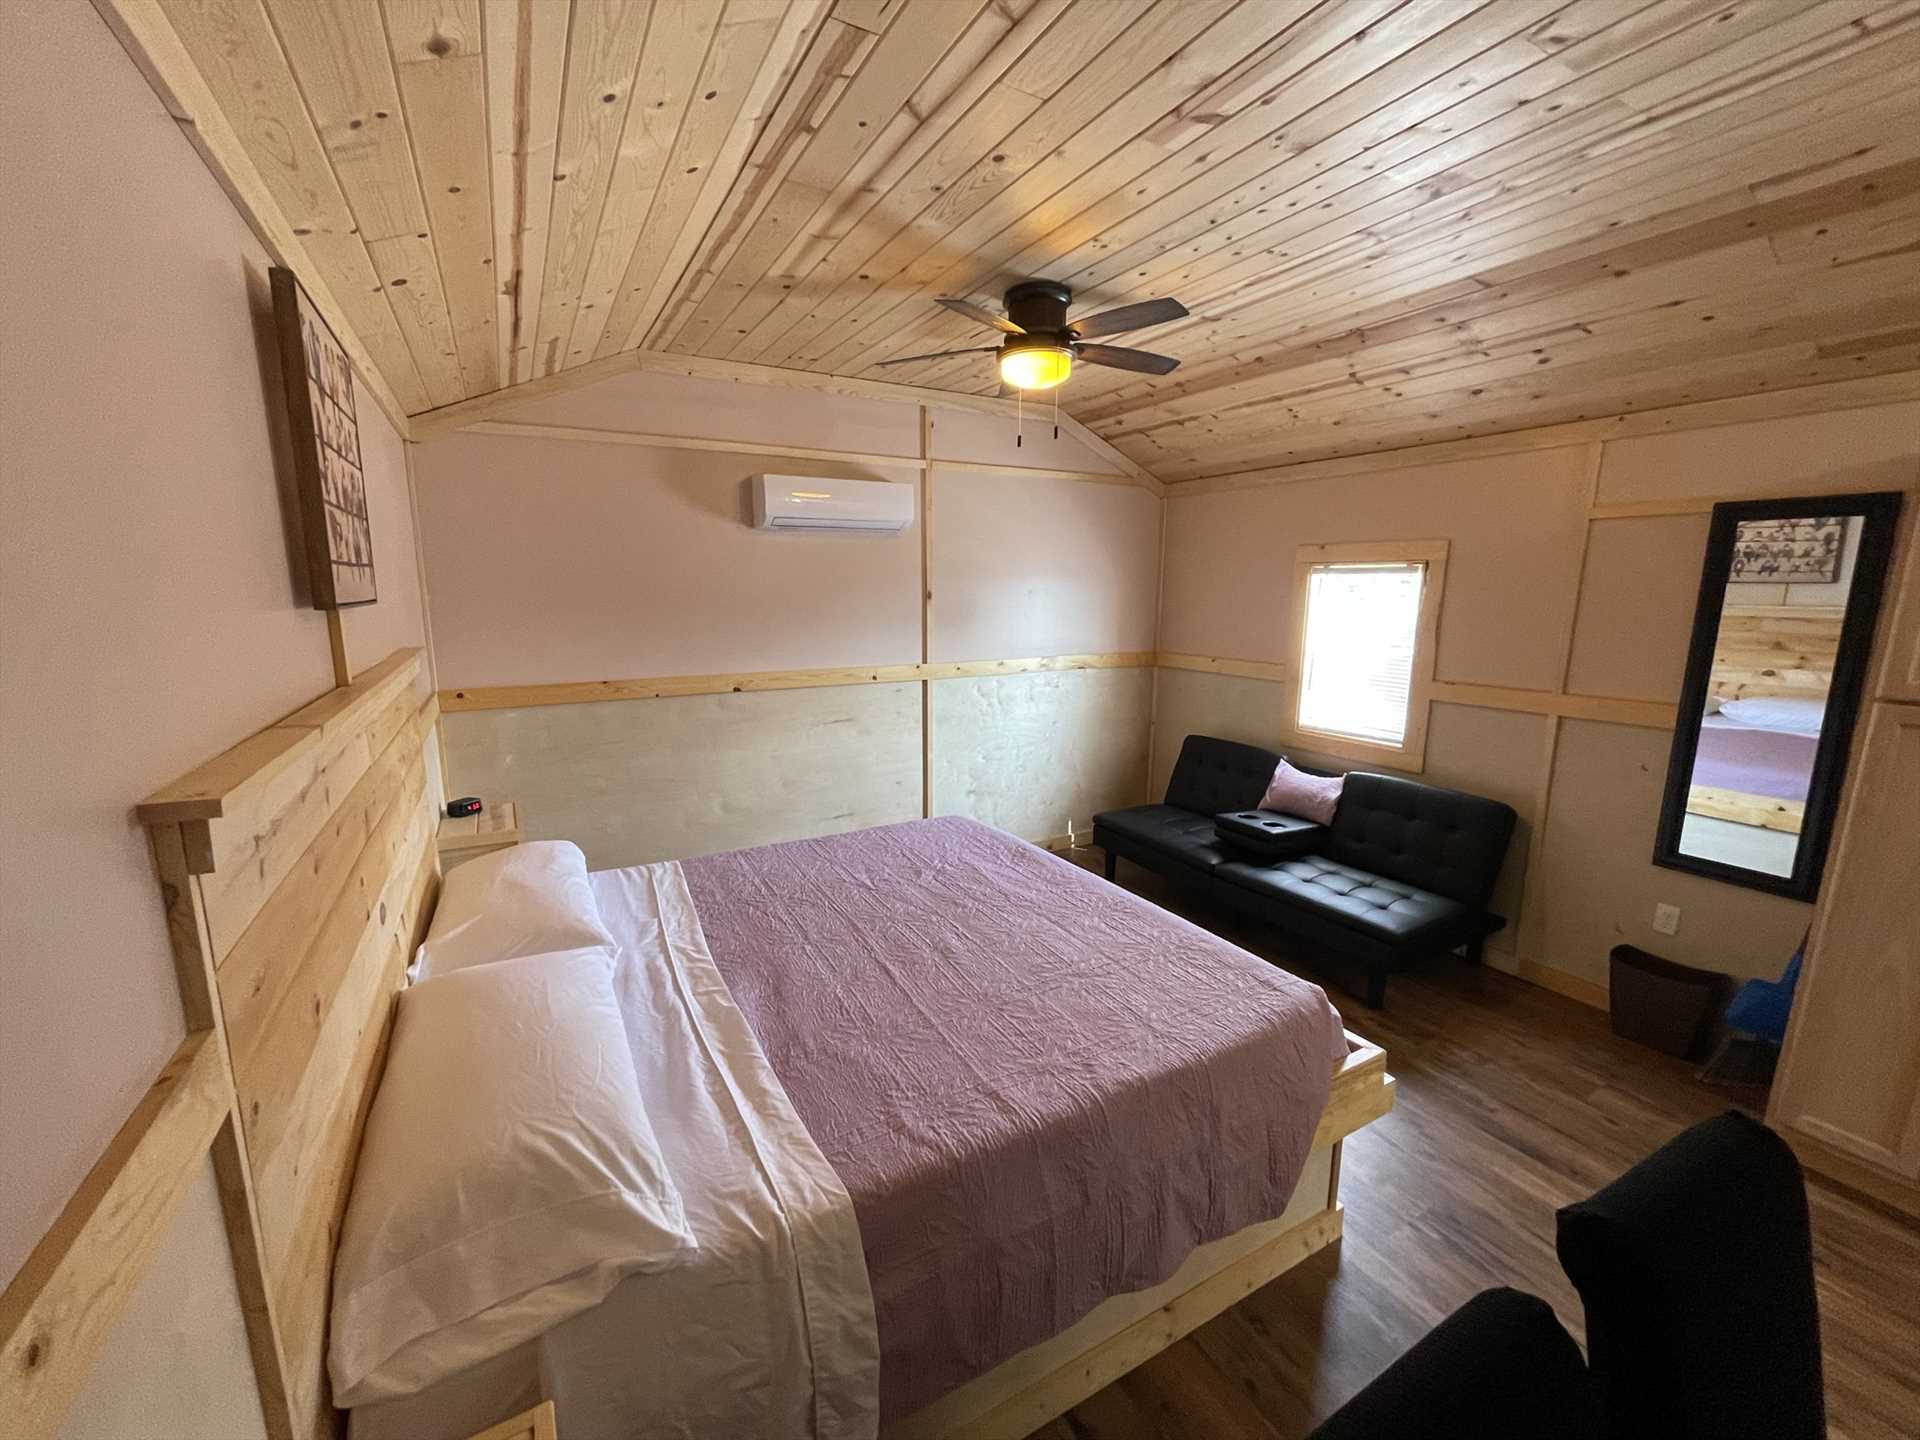                                                 A plush king-sized bed, futon, and bar-style chairs will all help you relax. The cabin sleeps three, and comes with clean bed linens, too!